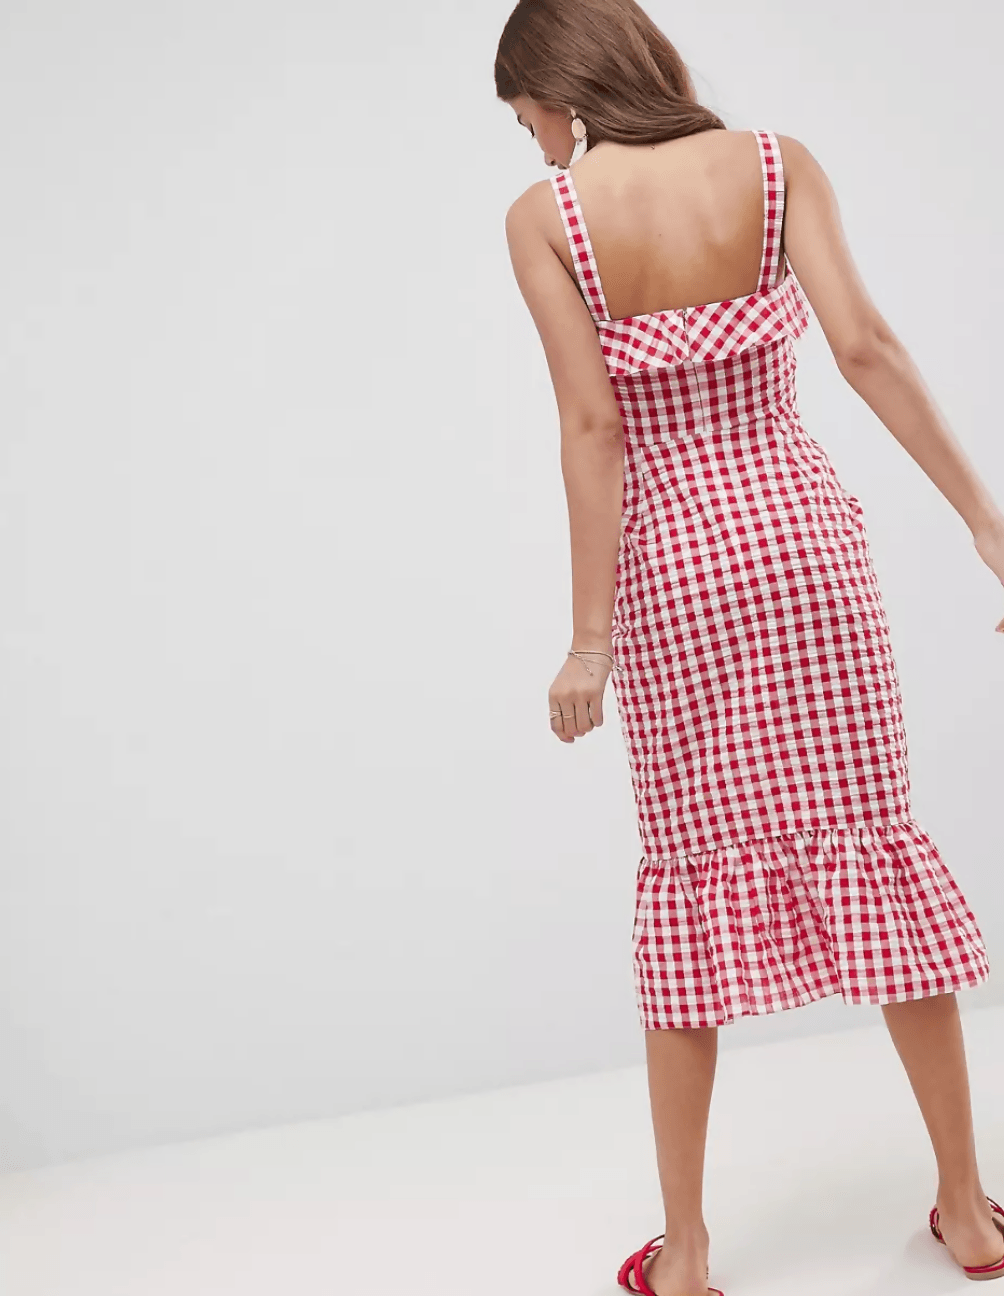 Gingham Red and White Checked Summer Midi Dress - Endless